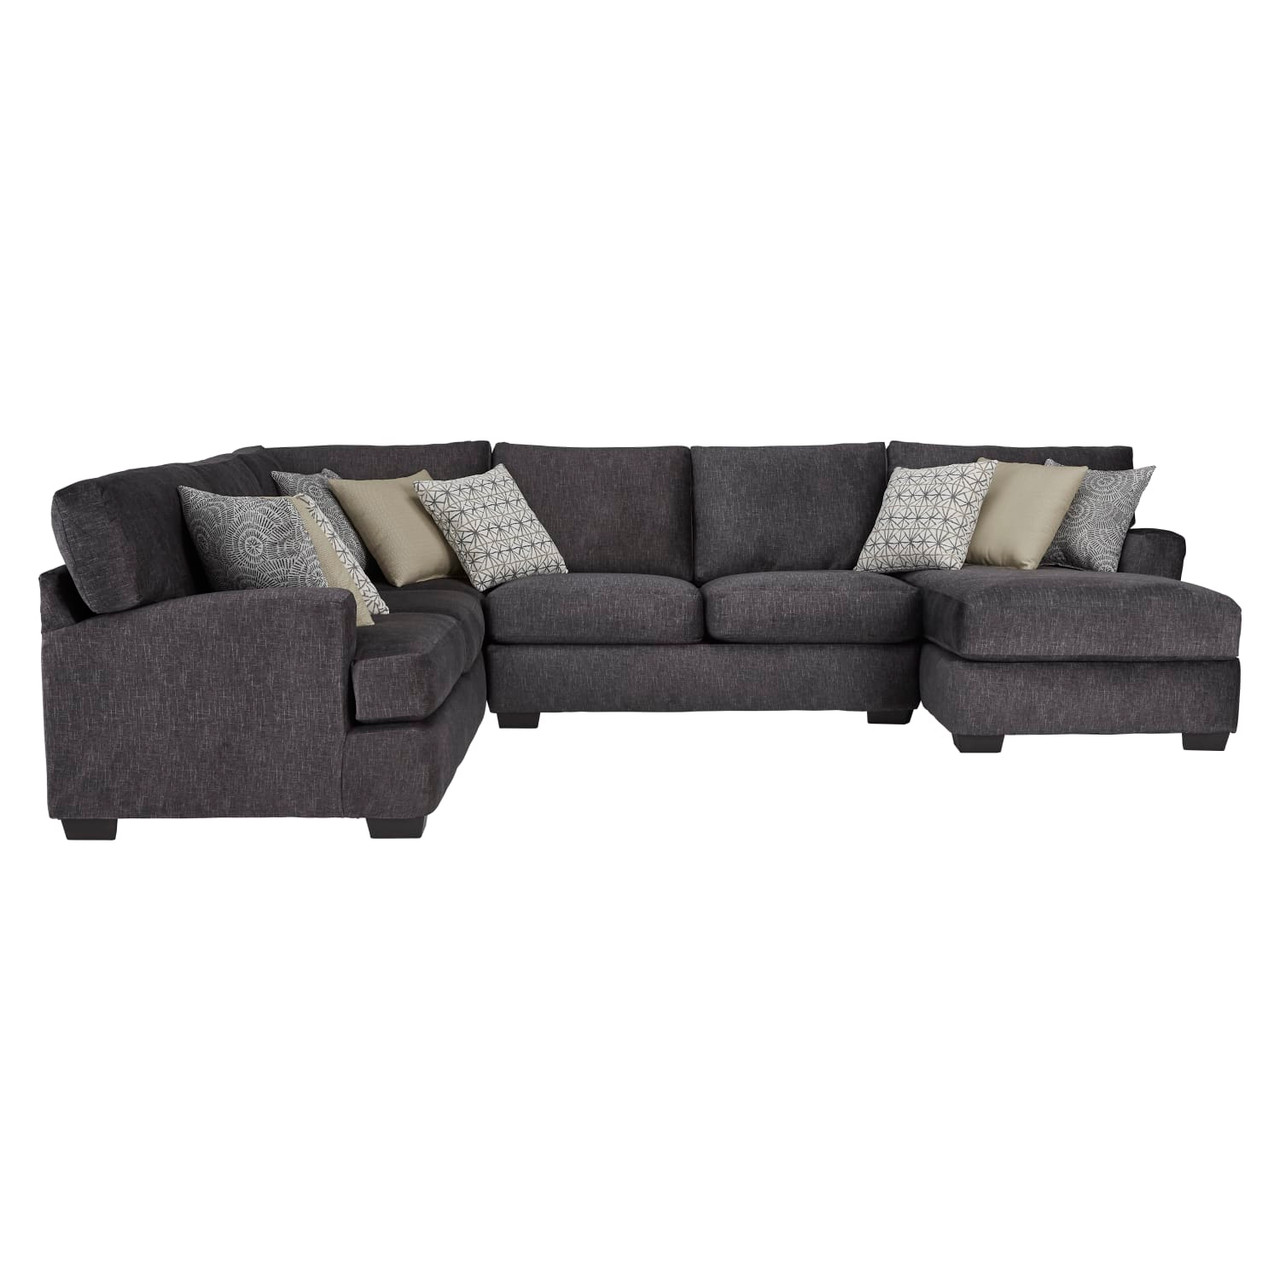 Boulevard Sectional - Left Side Facing Corner Sofa, Armless Loveseat, and Right Side Facing Chaise